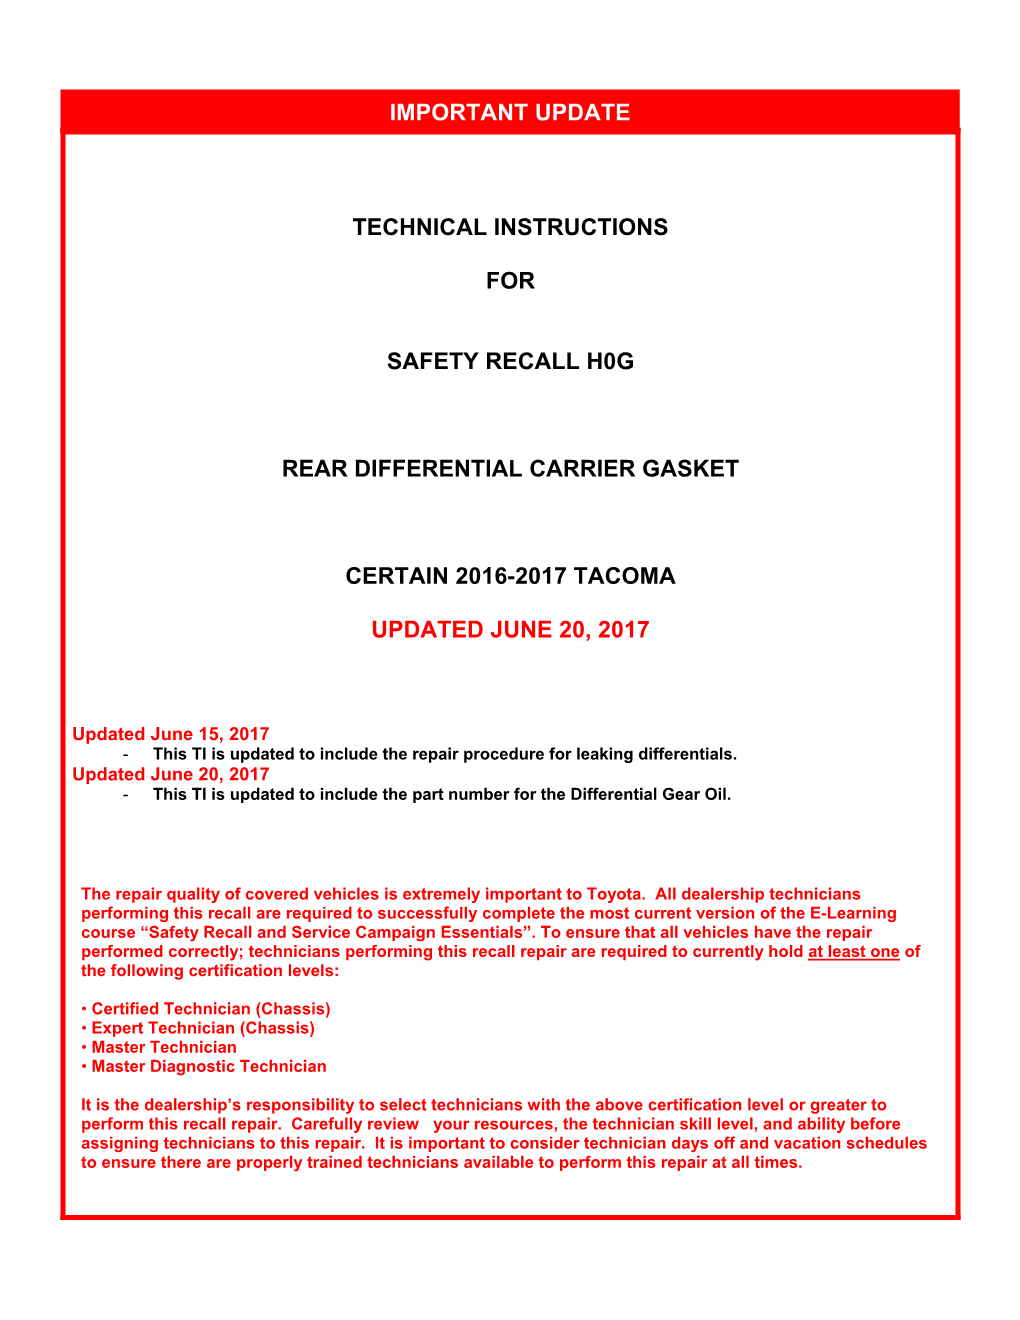 Important Update Technical Instructions for Safety Recall